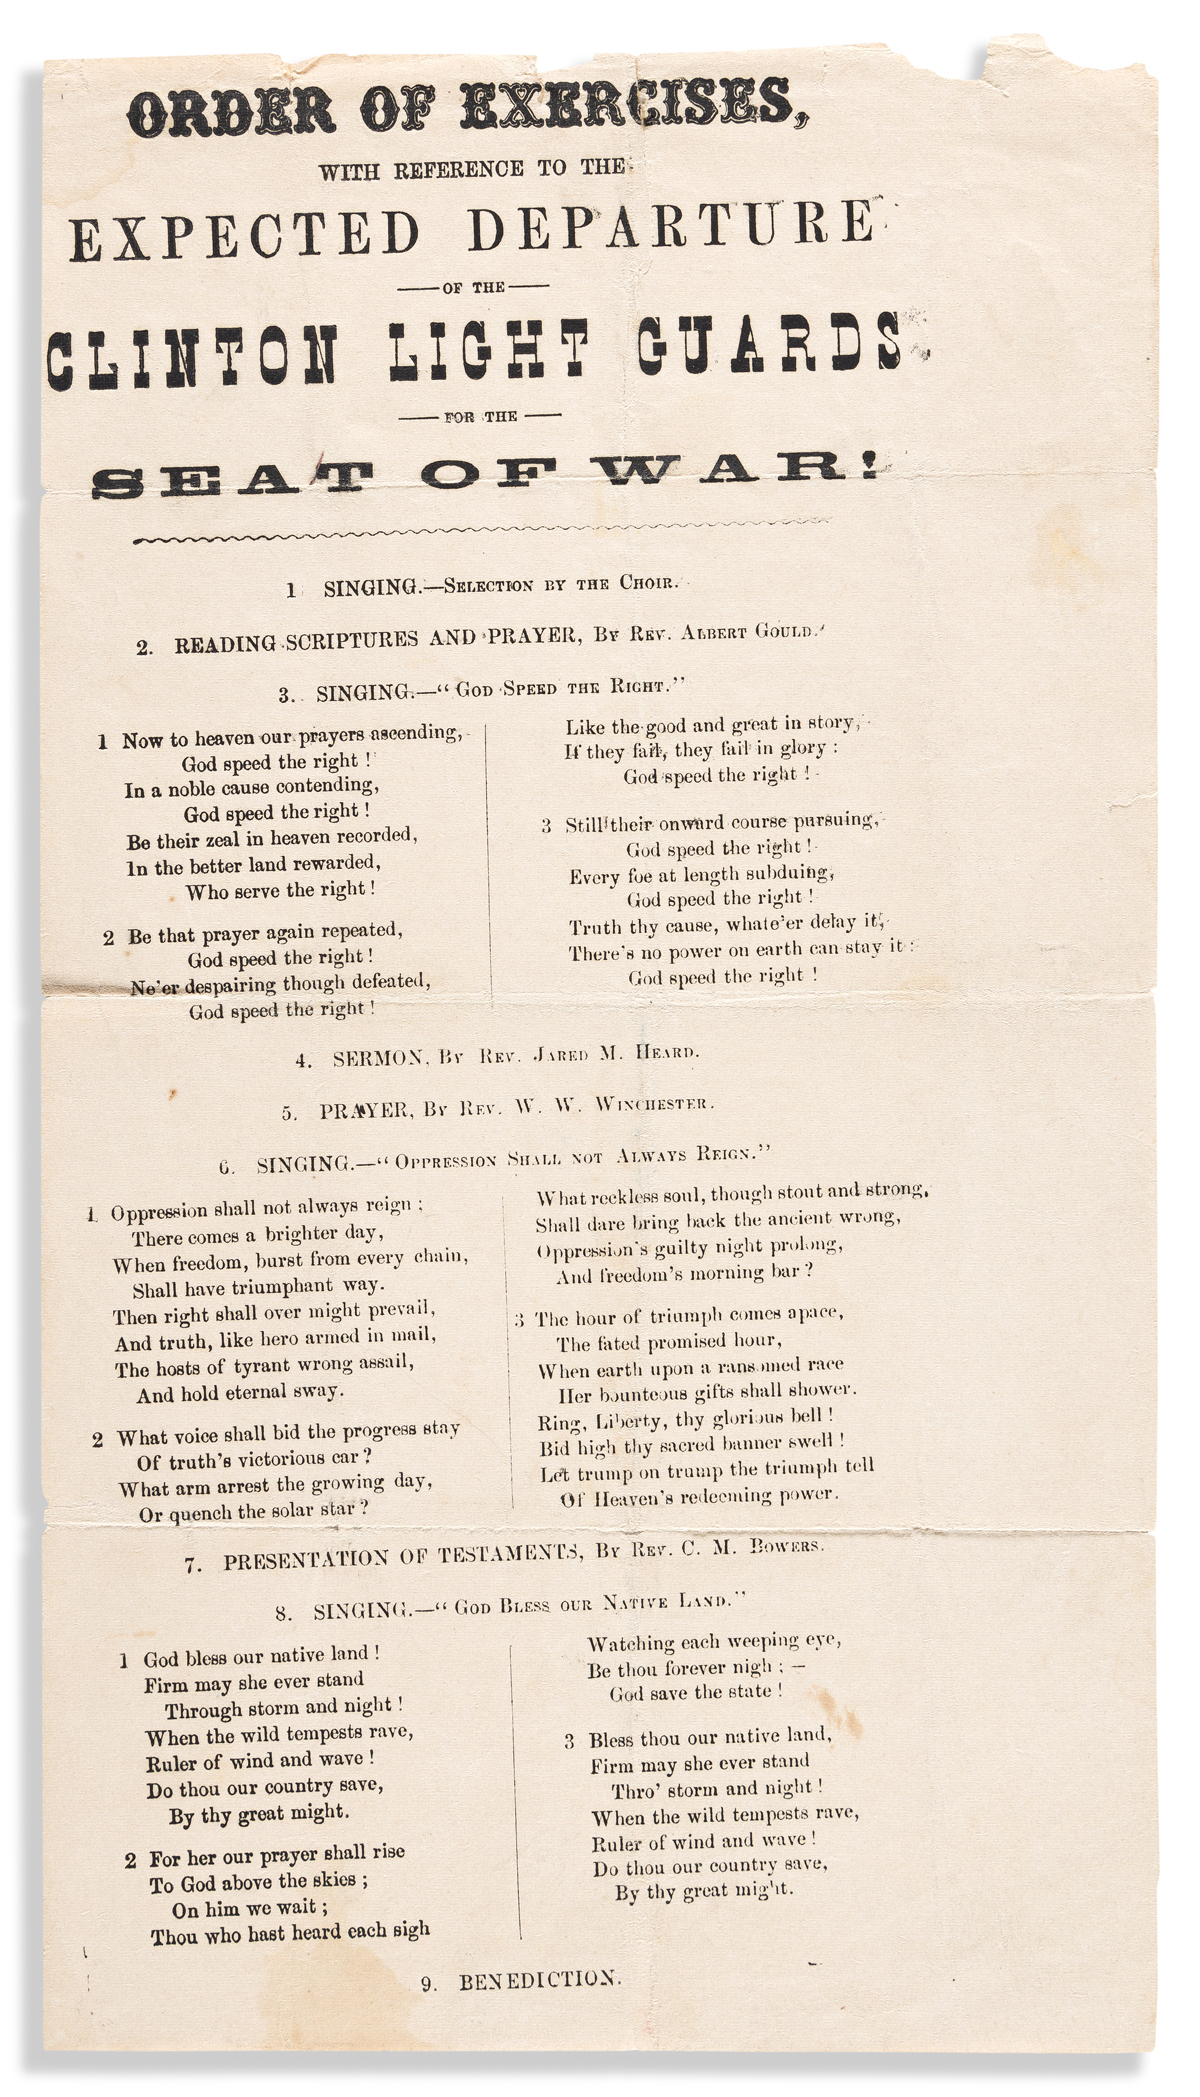 (CIVIL WAR--MASSACHUSETTS.) Order of Exercises with Reference to the Expected Departure of the Clinton Light Guards for the Seat of War